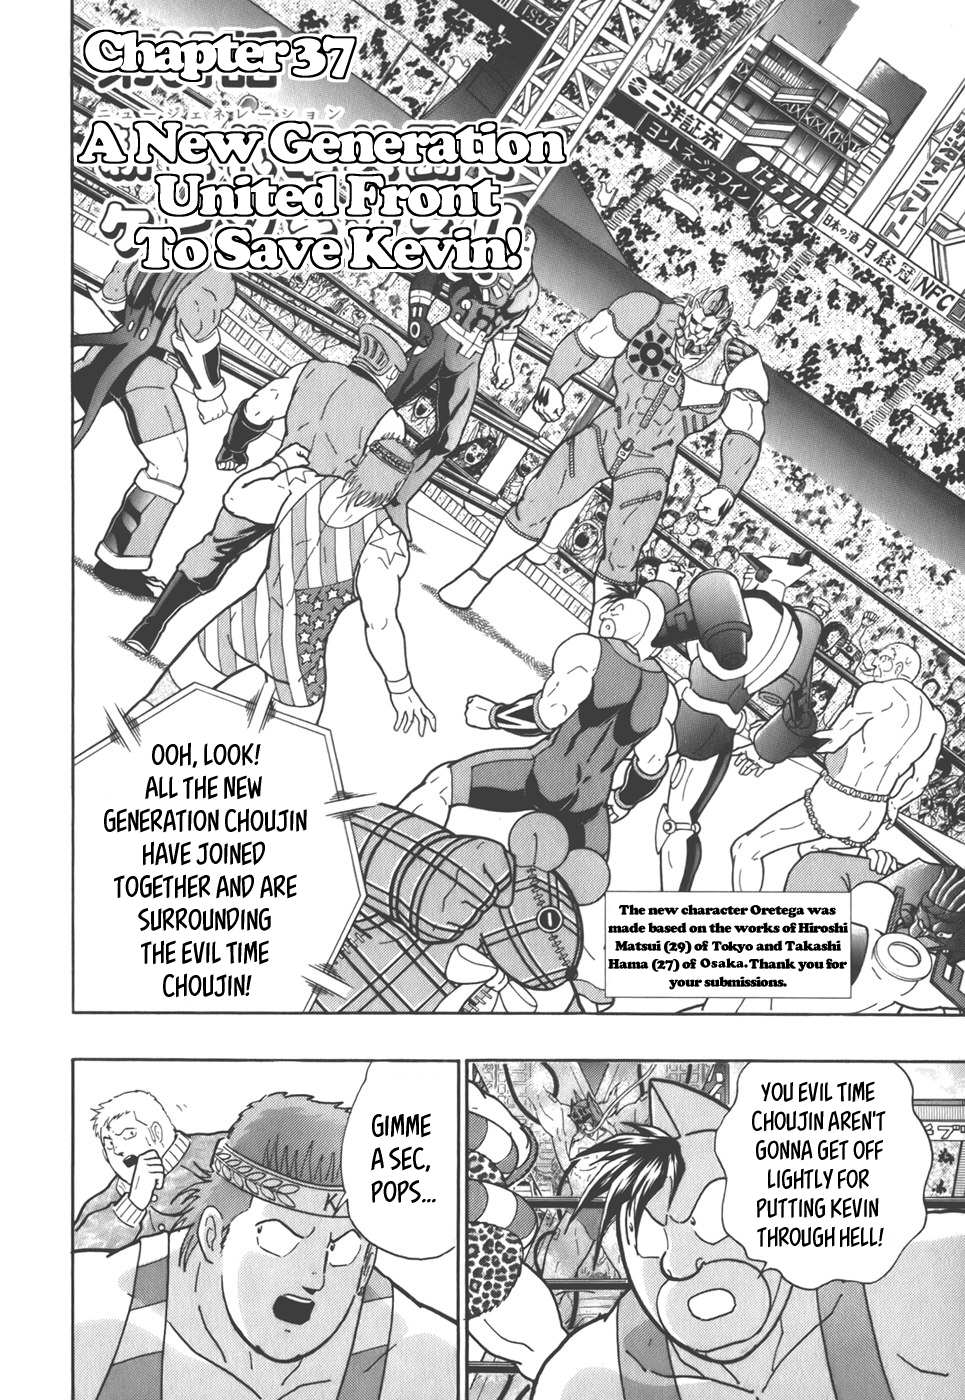 Kinnikuman Nisei: Ultimate Chojin Tag Vol. 4 Ch. 37 A New Generation United Front to Save Kevin!